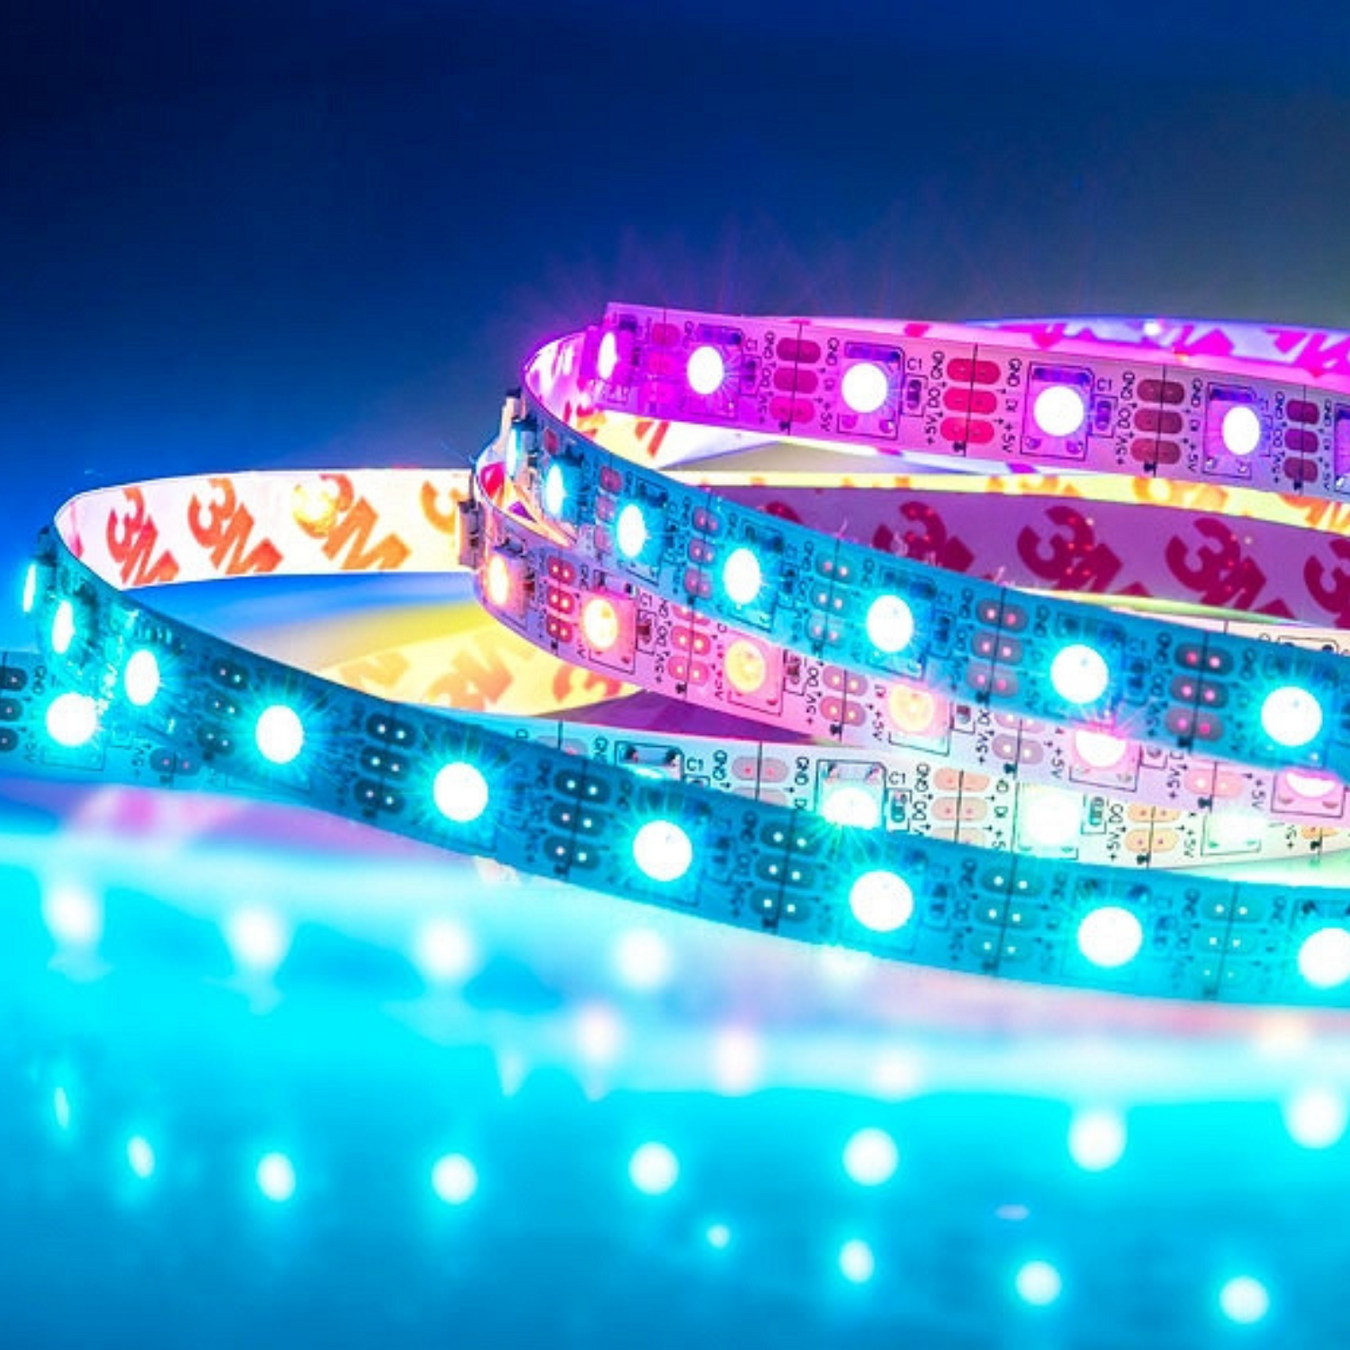 Addressable LED strip | Wired4signs USA